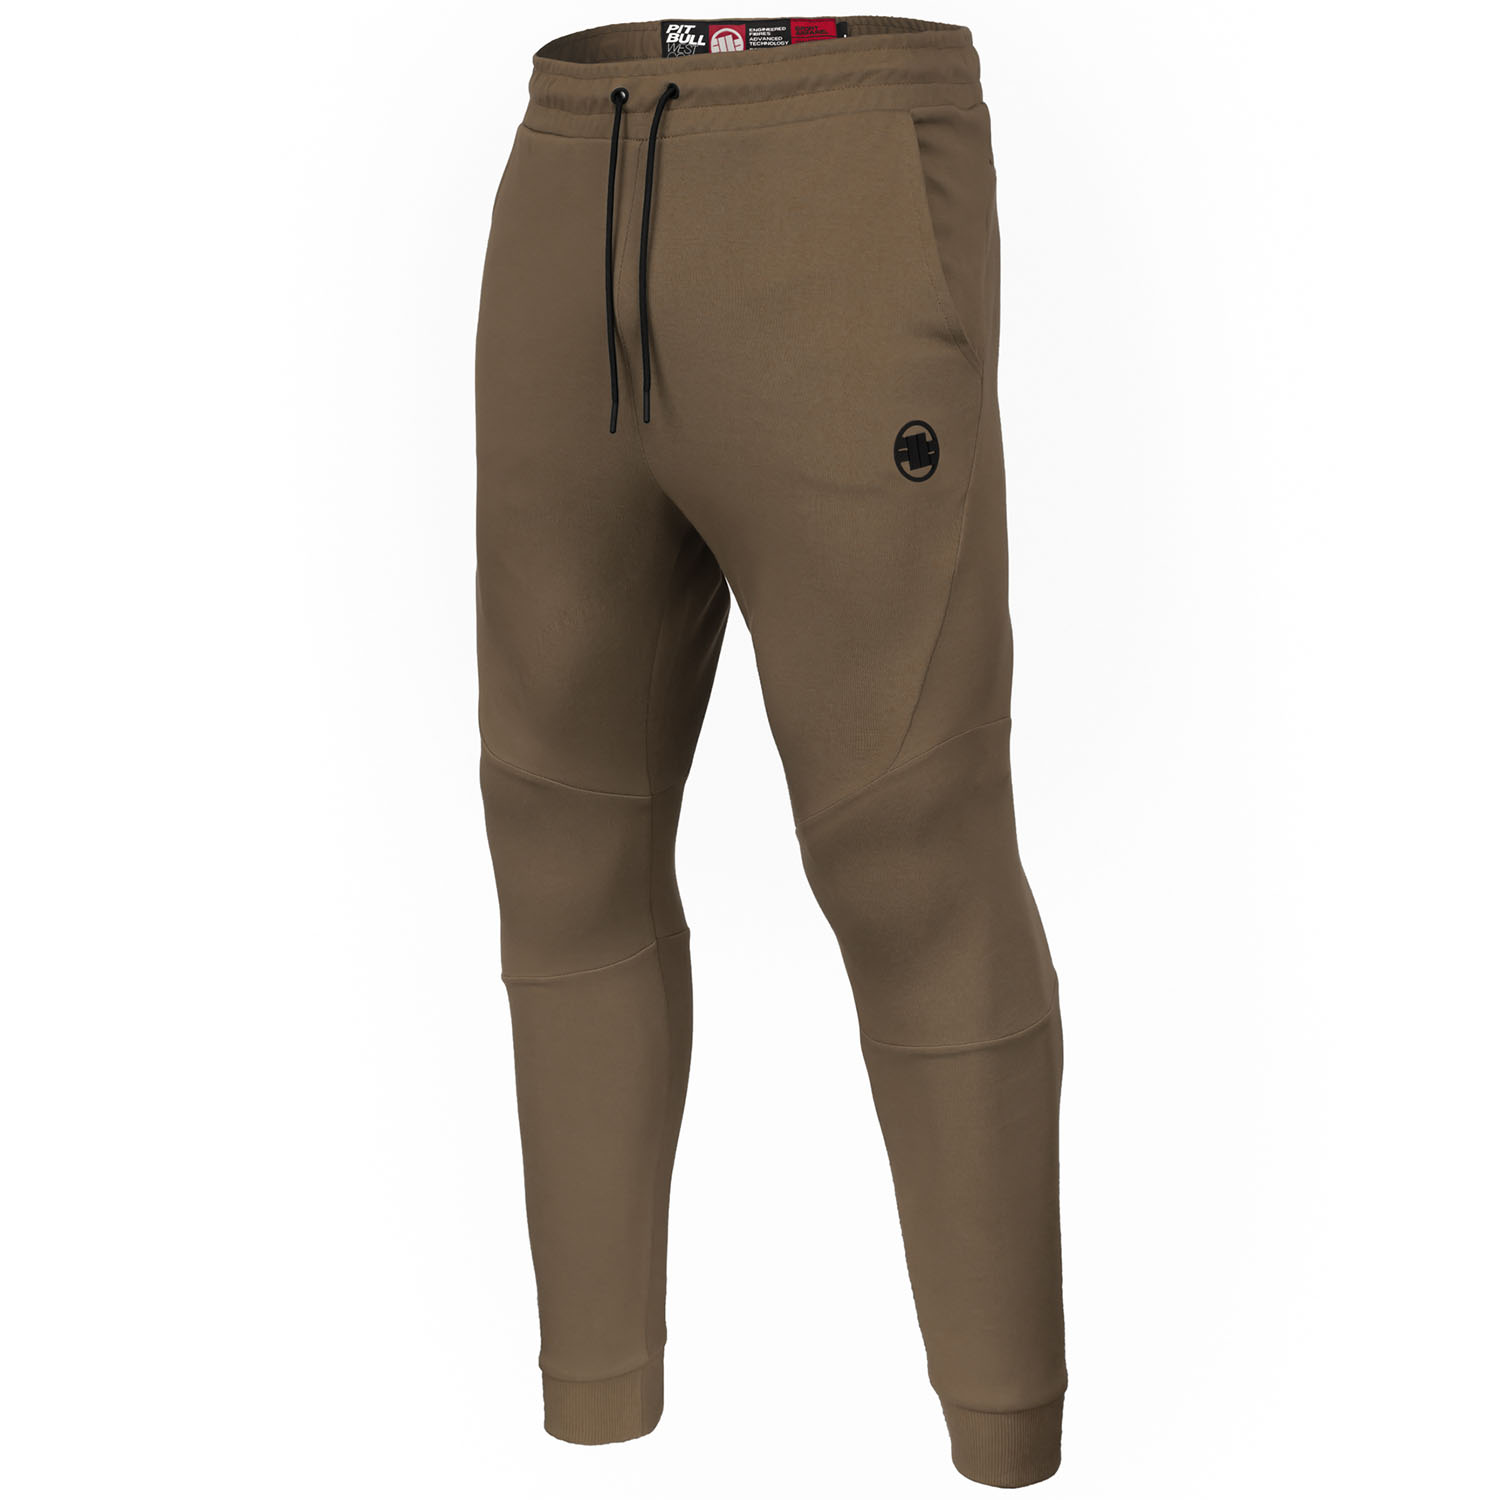 Pit Bull West Coast Jogger, Dolphin, brown